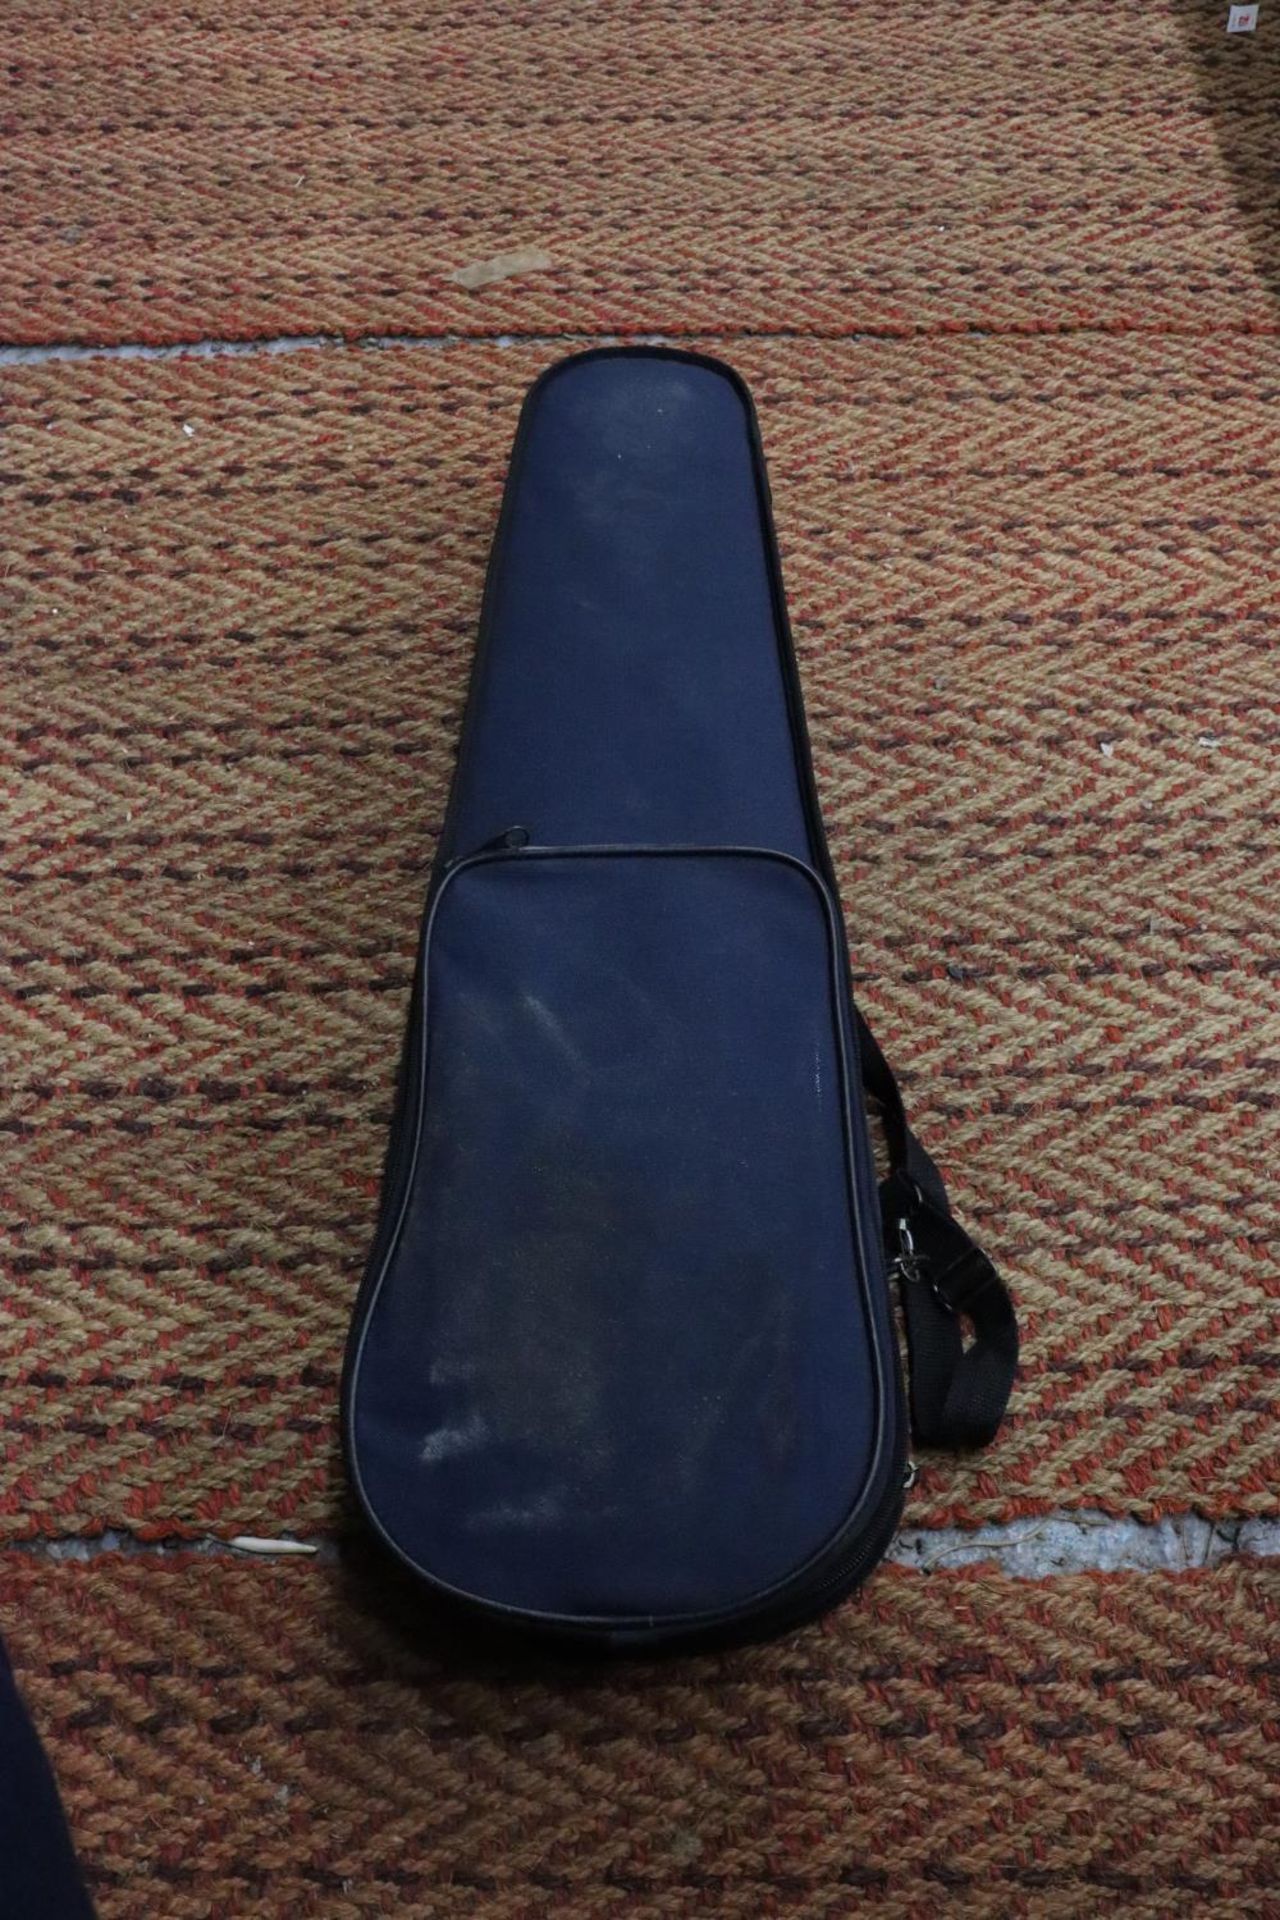 A STENTOR STUDENT 1/4 VIOLIN IN A CASE - Image 2 of 6